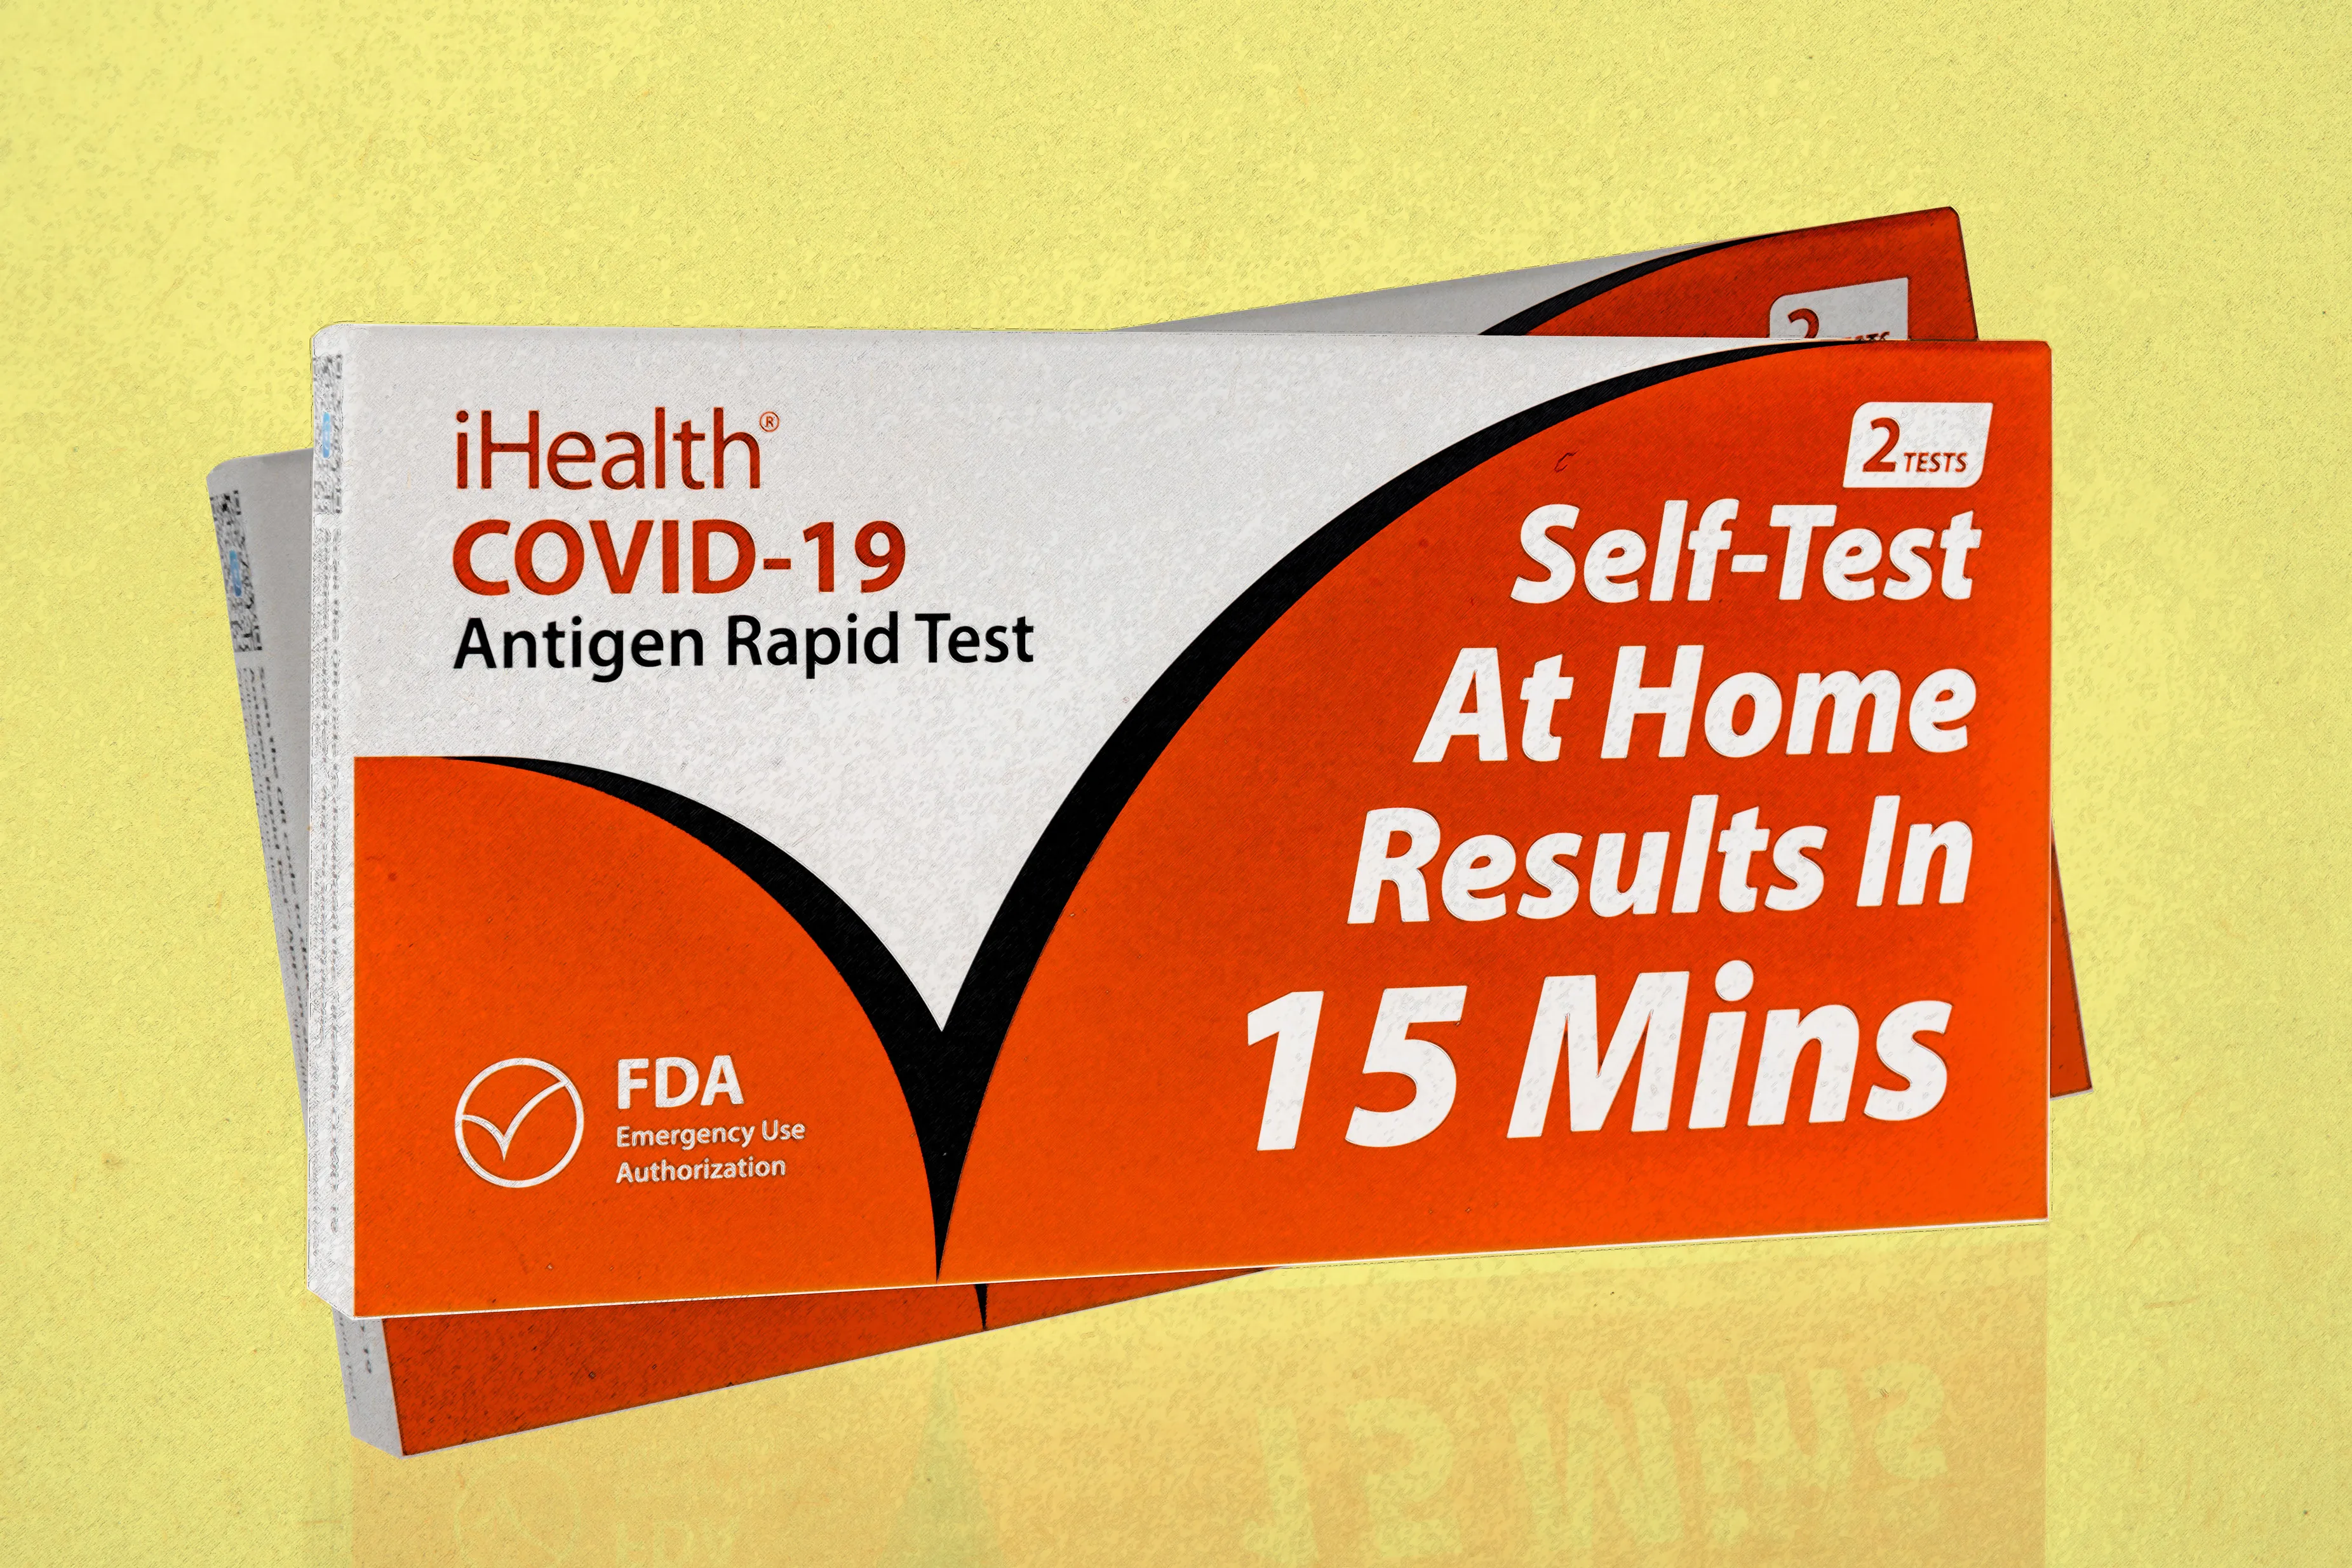 How to Get Free COVID19 Tests From the Government (Again) Money